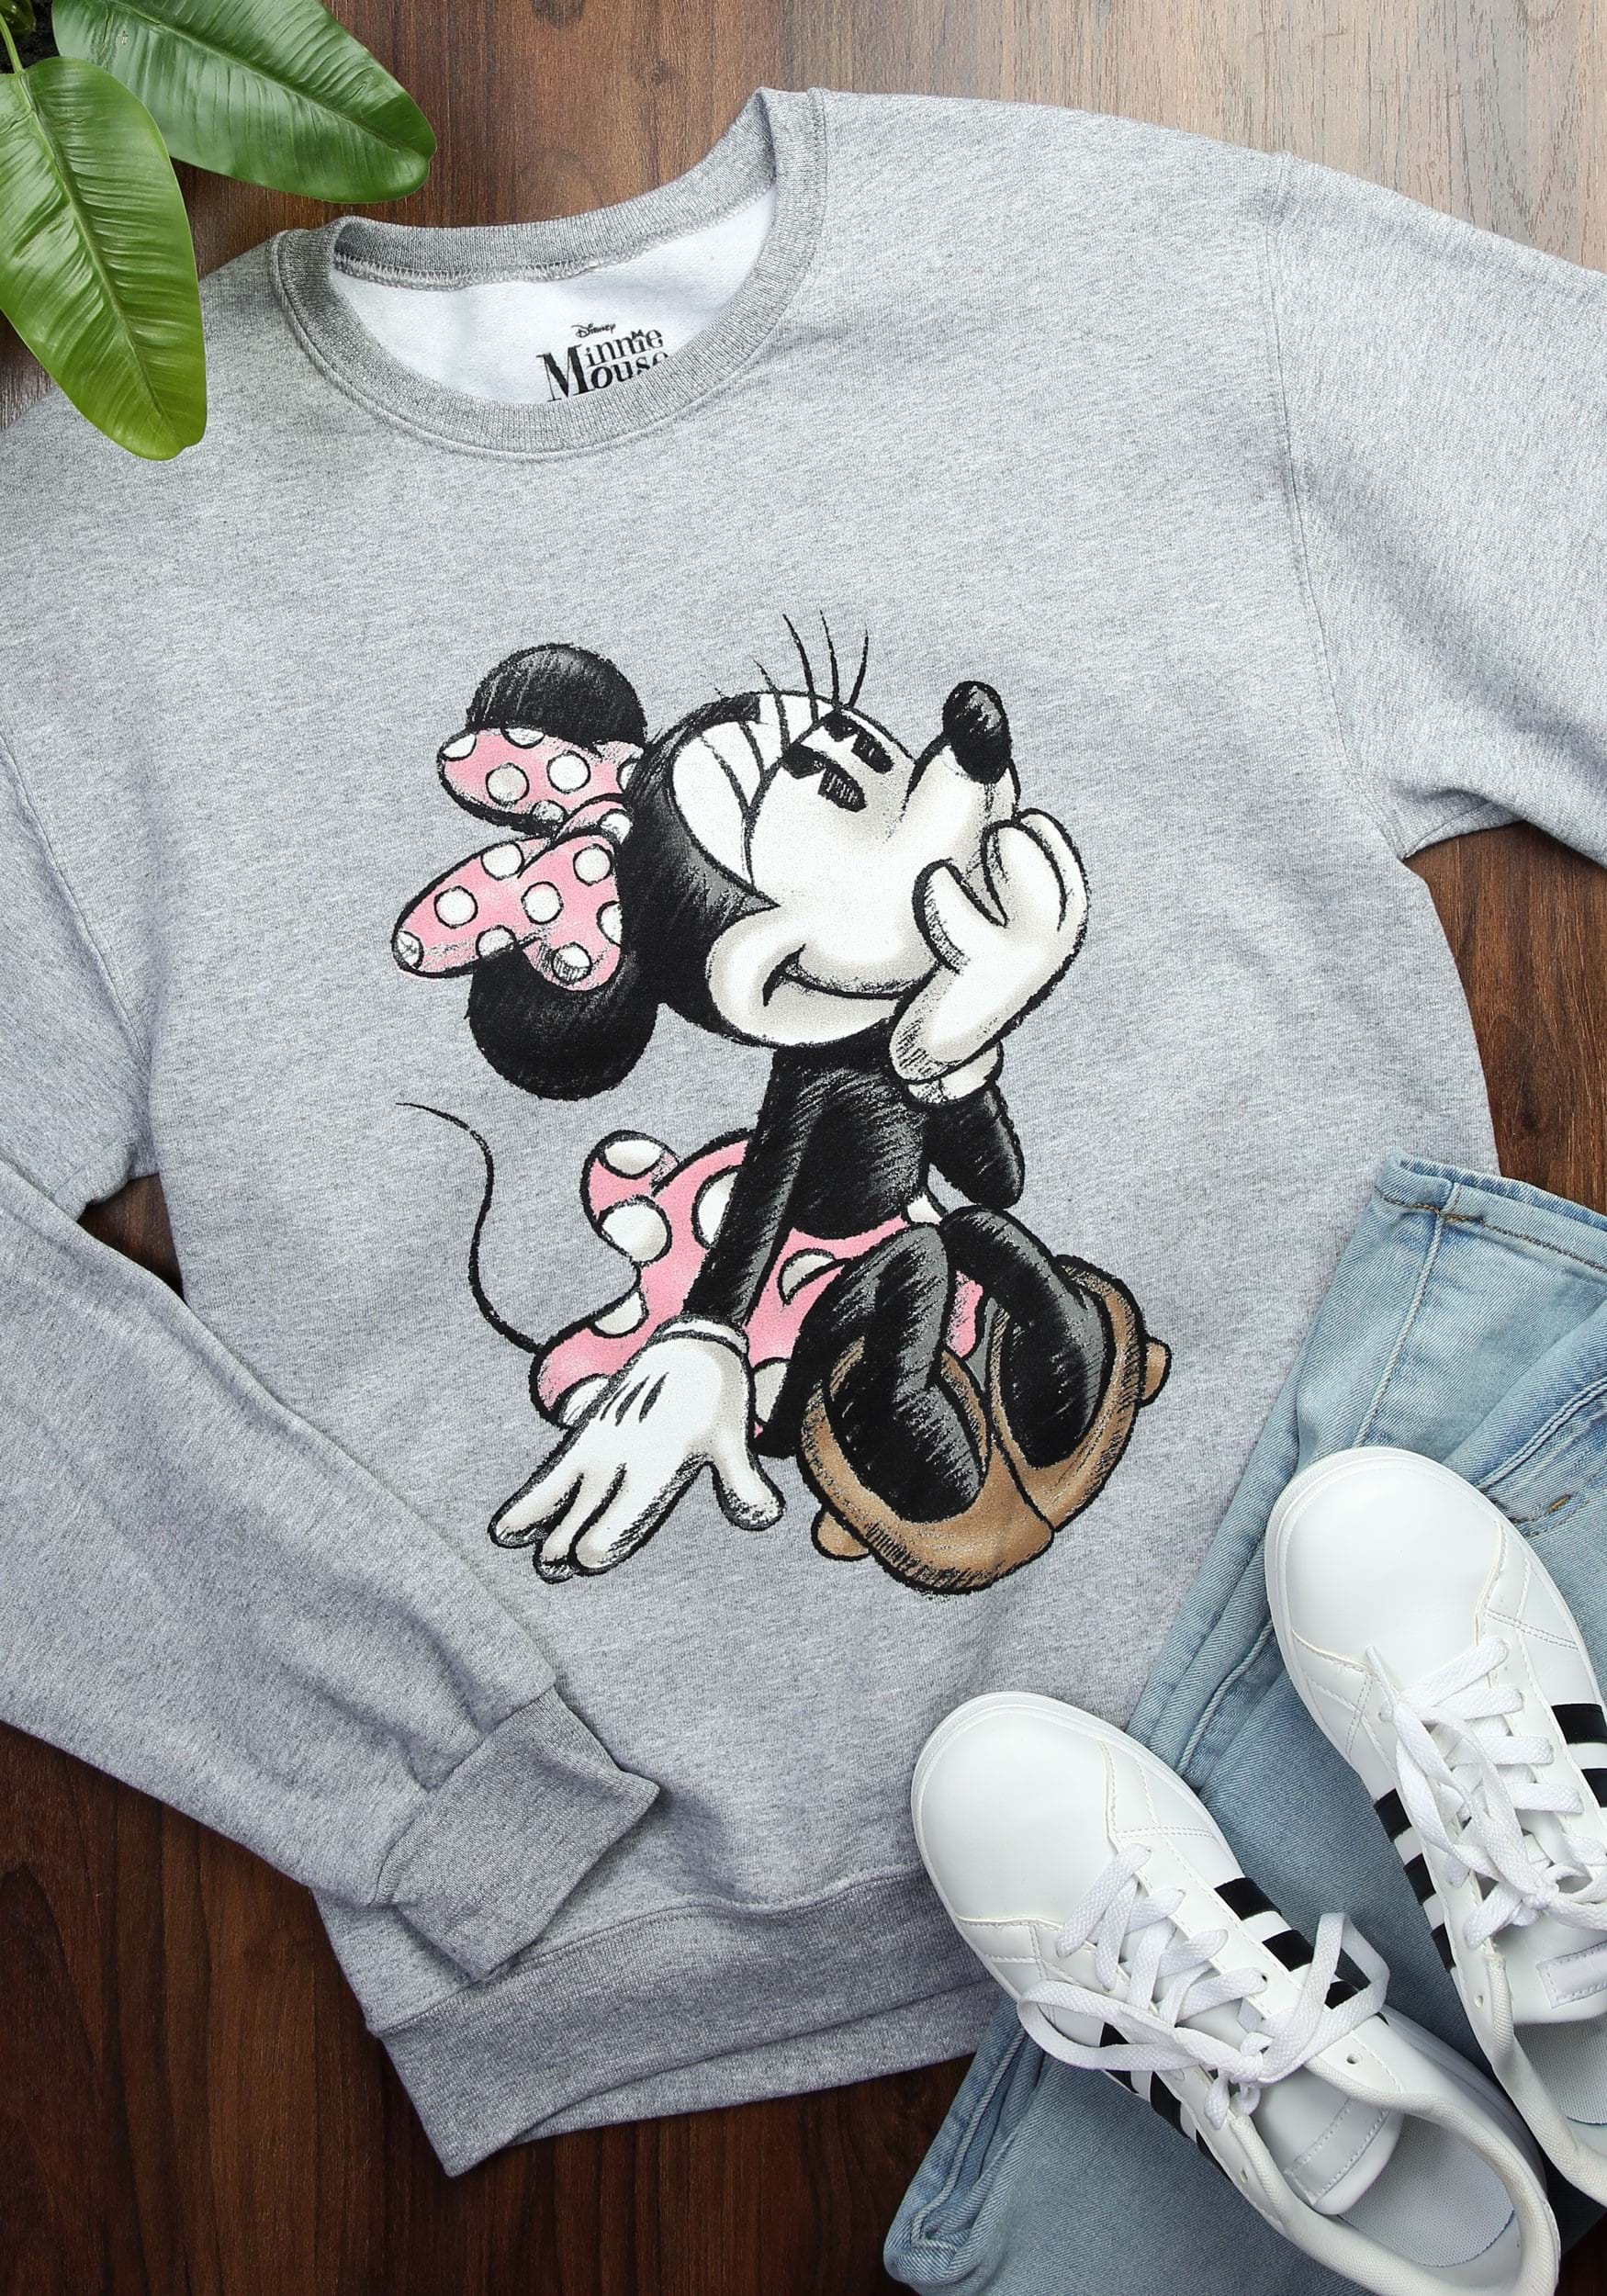 Officially Licensed Disney Minnie Mouse Girls' White Trainers